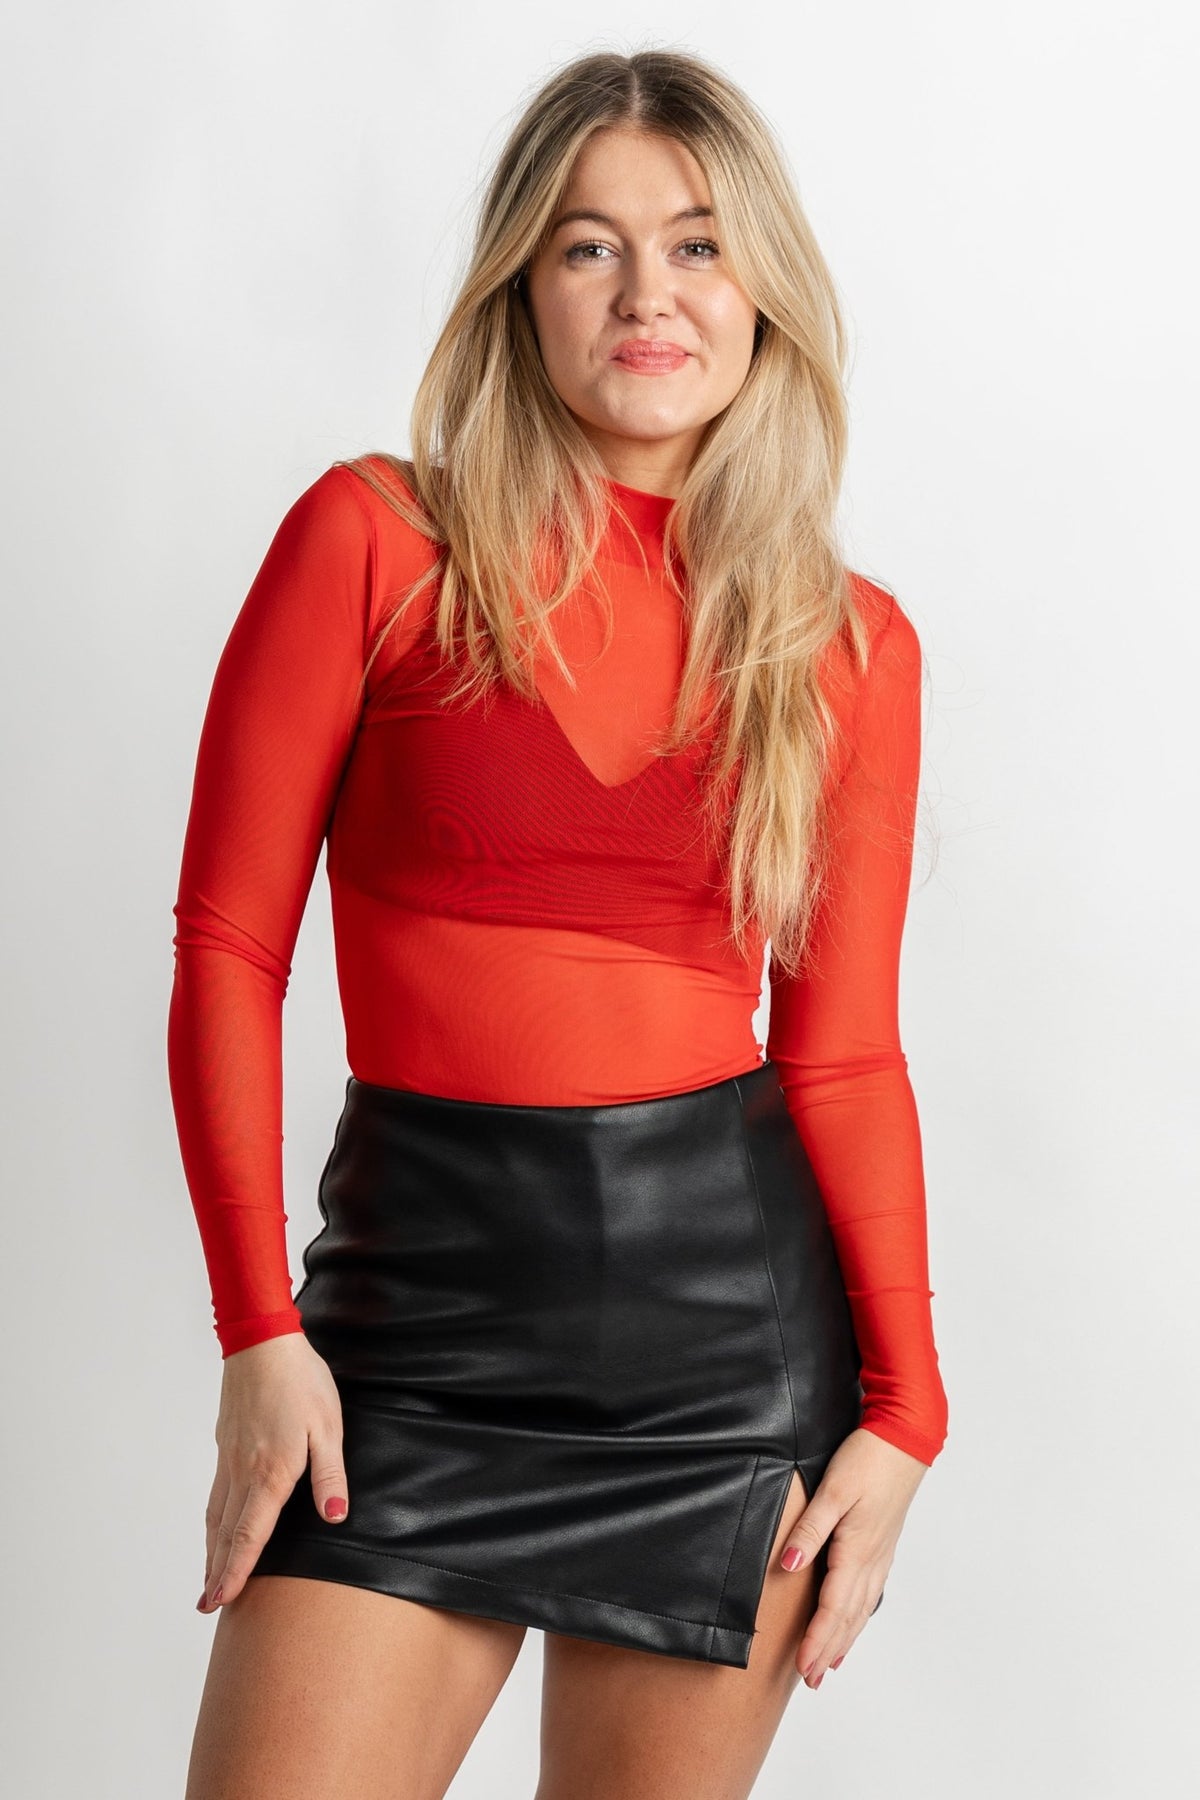 Long sleeve mesh bodysuit red - Trendy T-Shirts for Valentine's Day at Lush Fashion Lounge Boutique in Oklahoma City